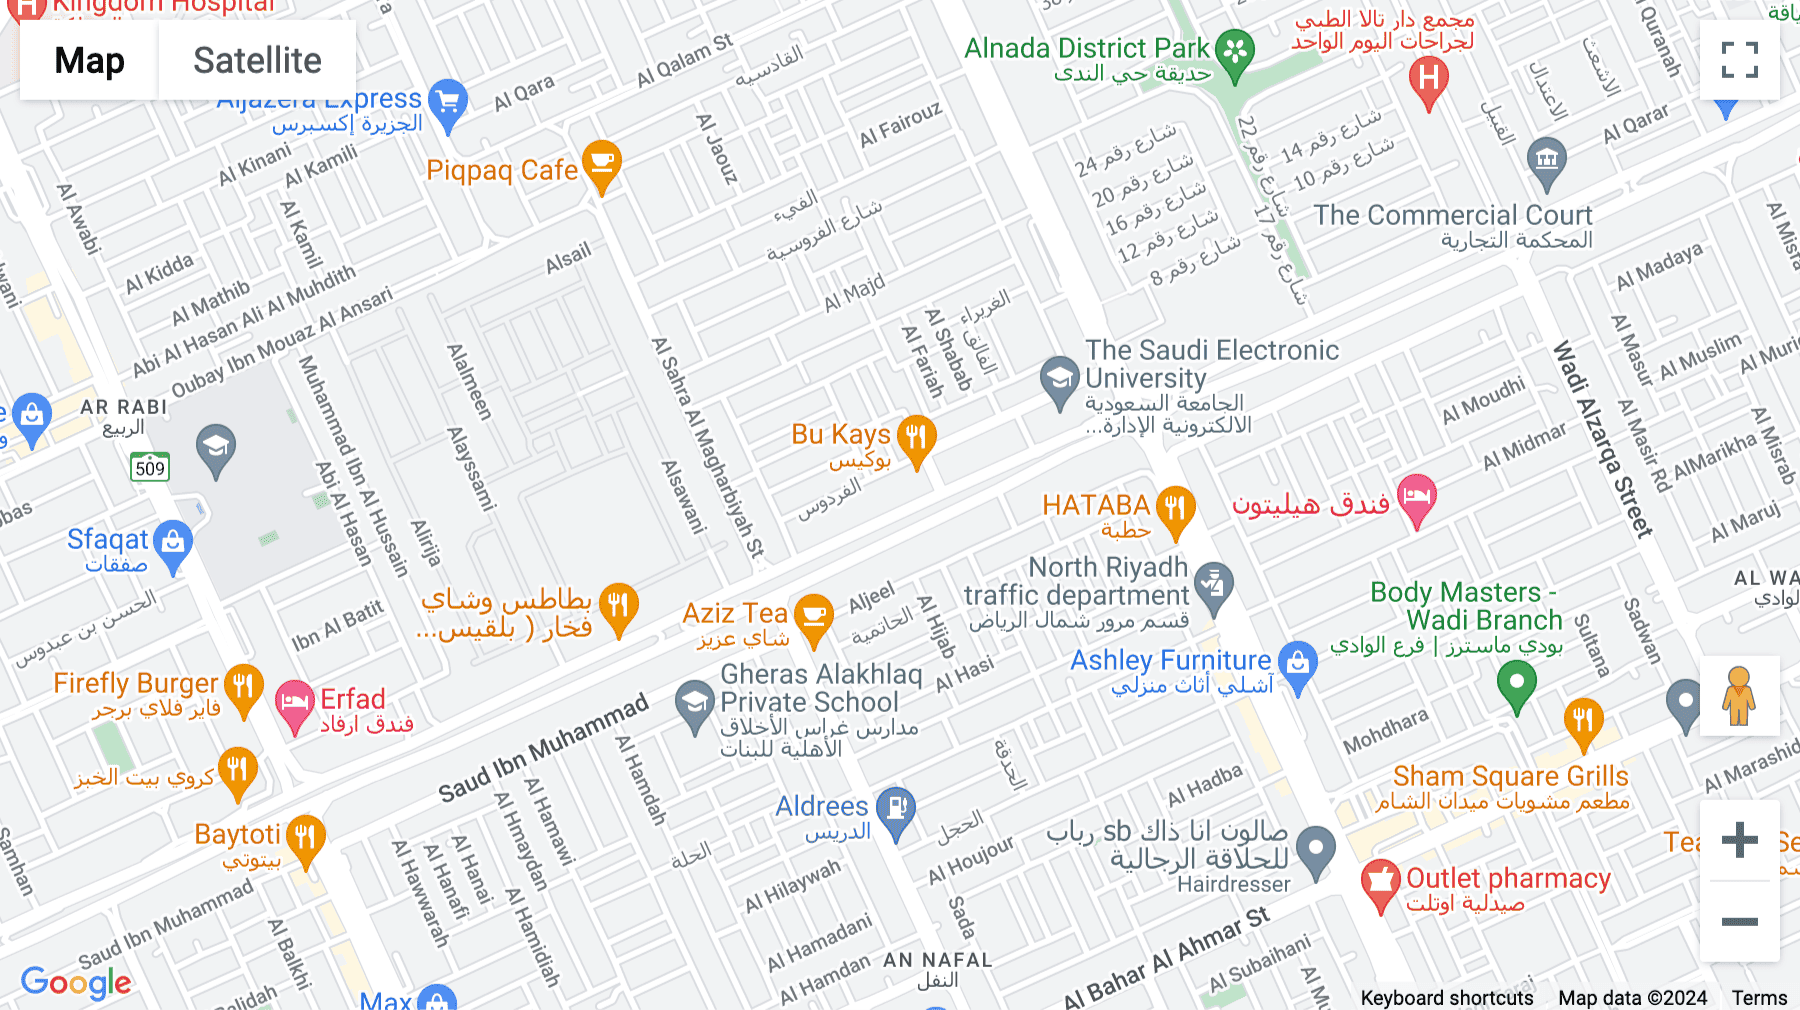 Click for interative map of Spring Towers, 3rd floor,Prince Mohammed Ibn Salman Road,, Riyadh